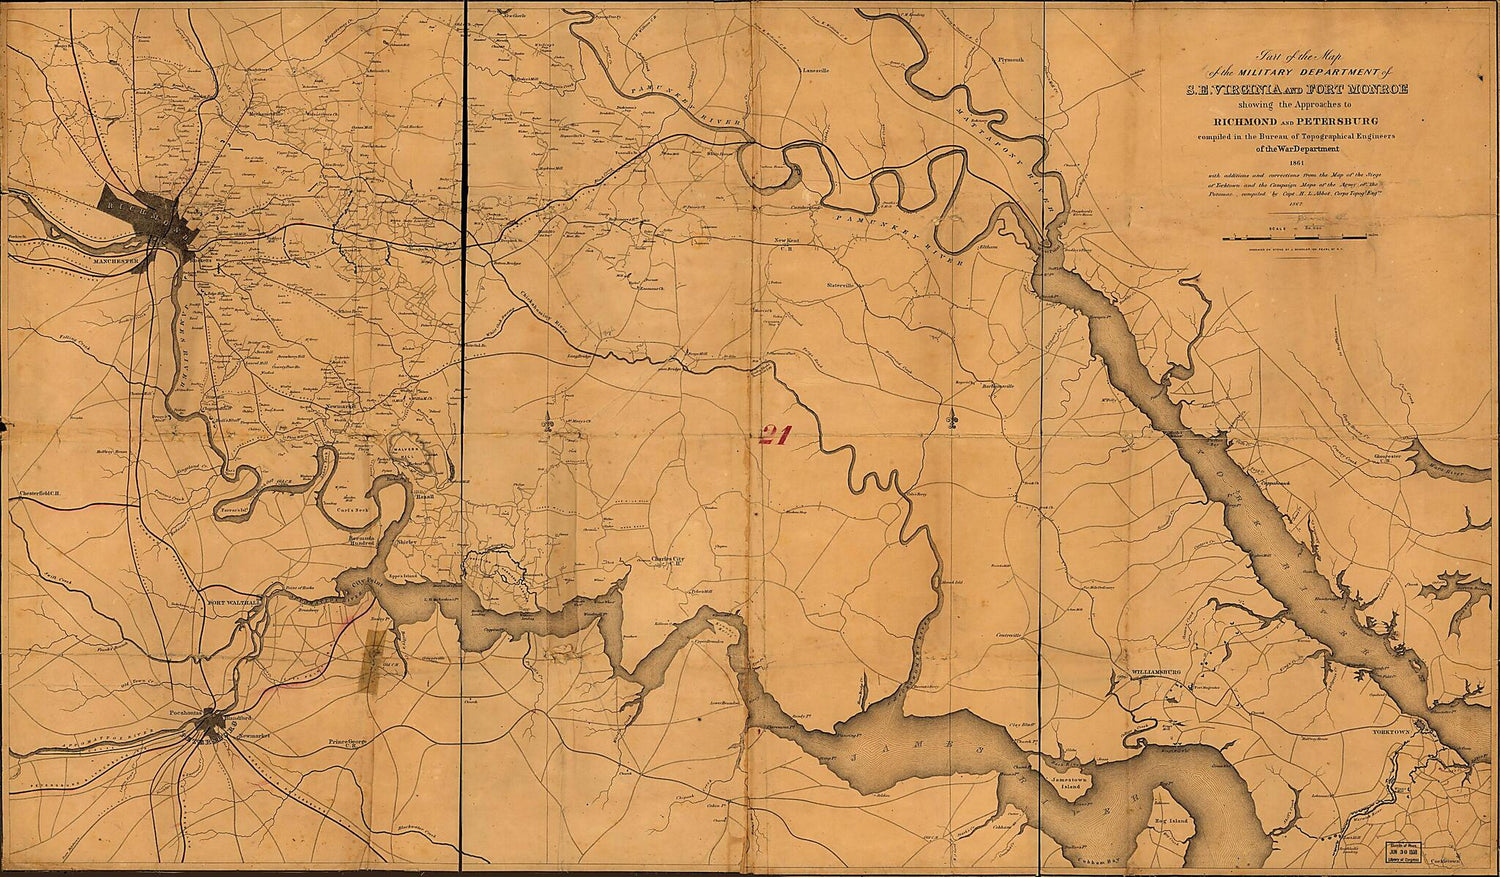 This old map of Part of the Map of the Military Department of S.E. Virginia and Fort Monroe, Showing the Approaches to Richmond and Petersburg from 1862 was created by  United States. Army. Corps of Engineers in 1862